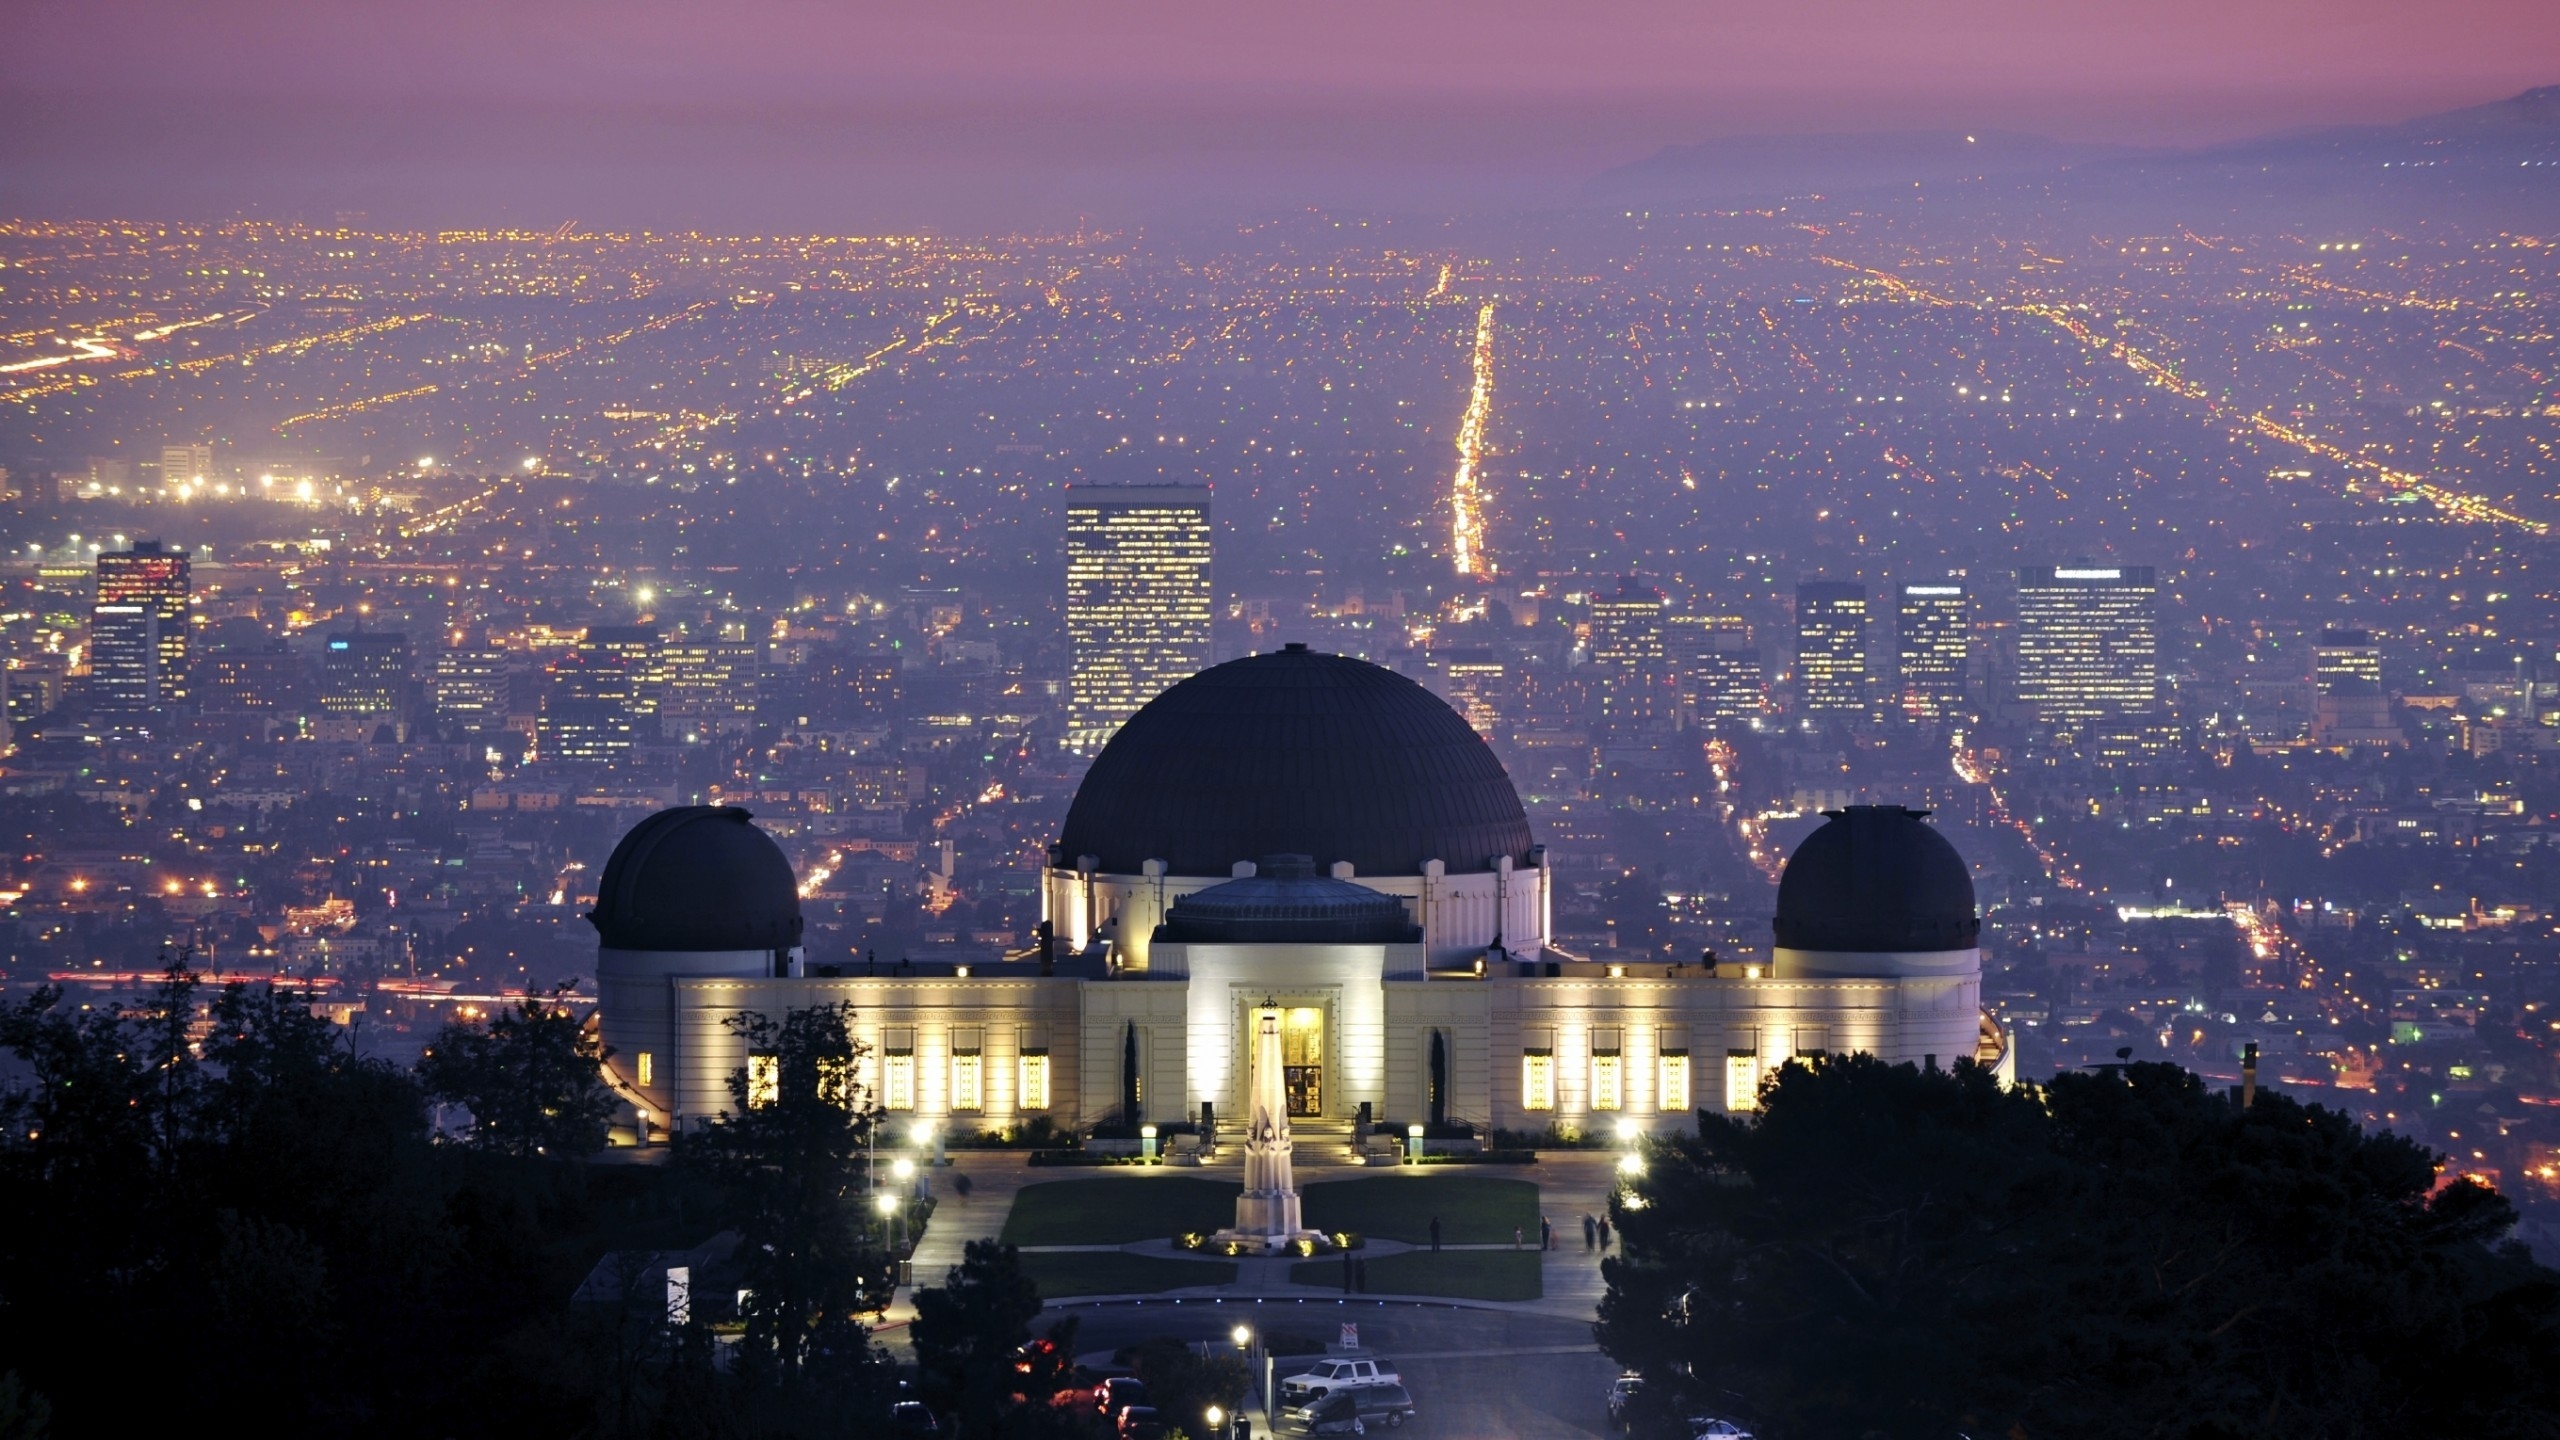 Griffith Observatory Los Angeles for 2560x1440 HDTV resolution